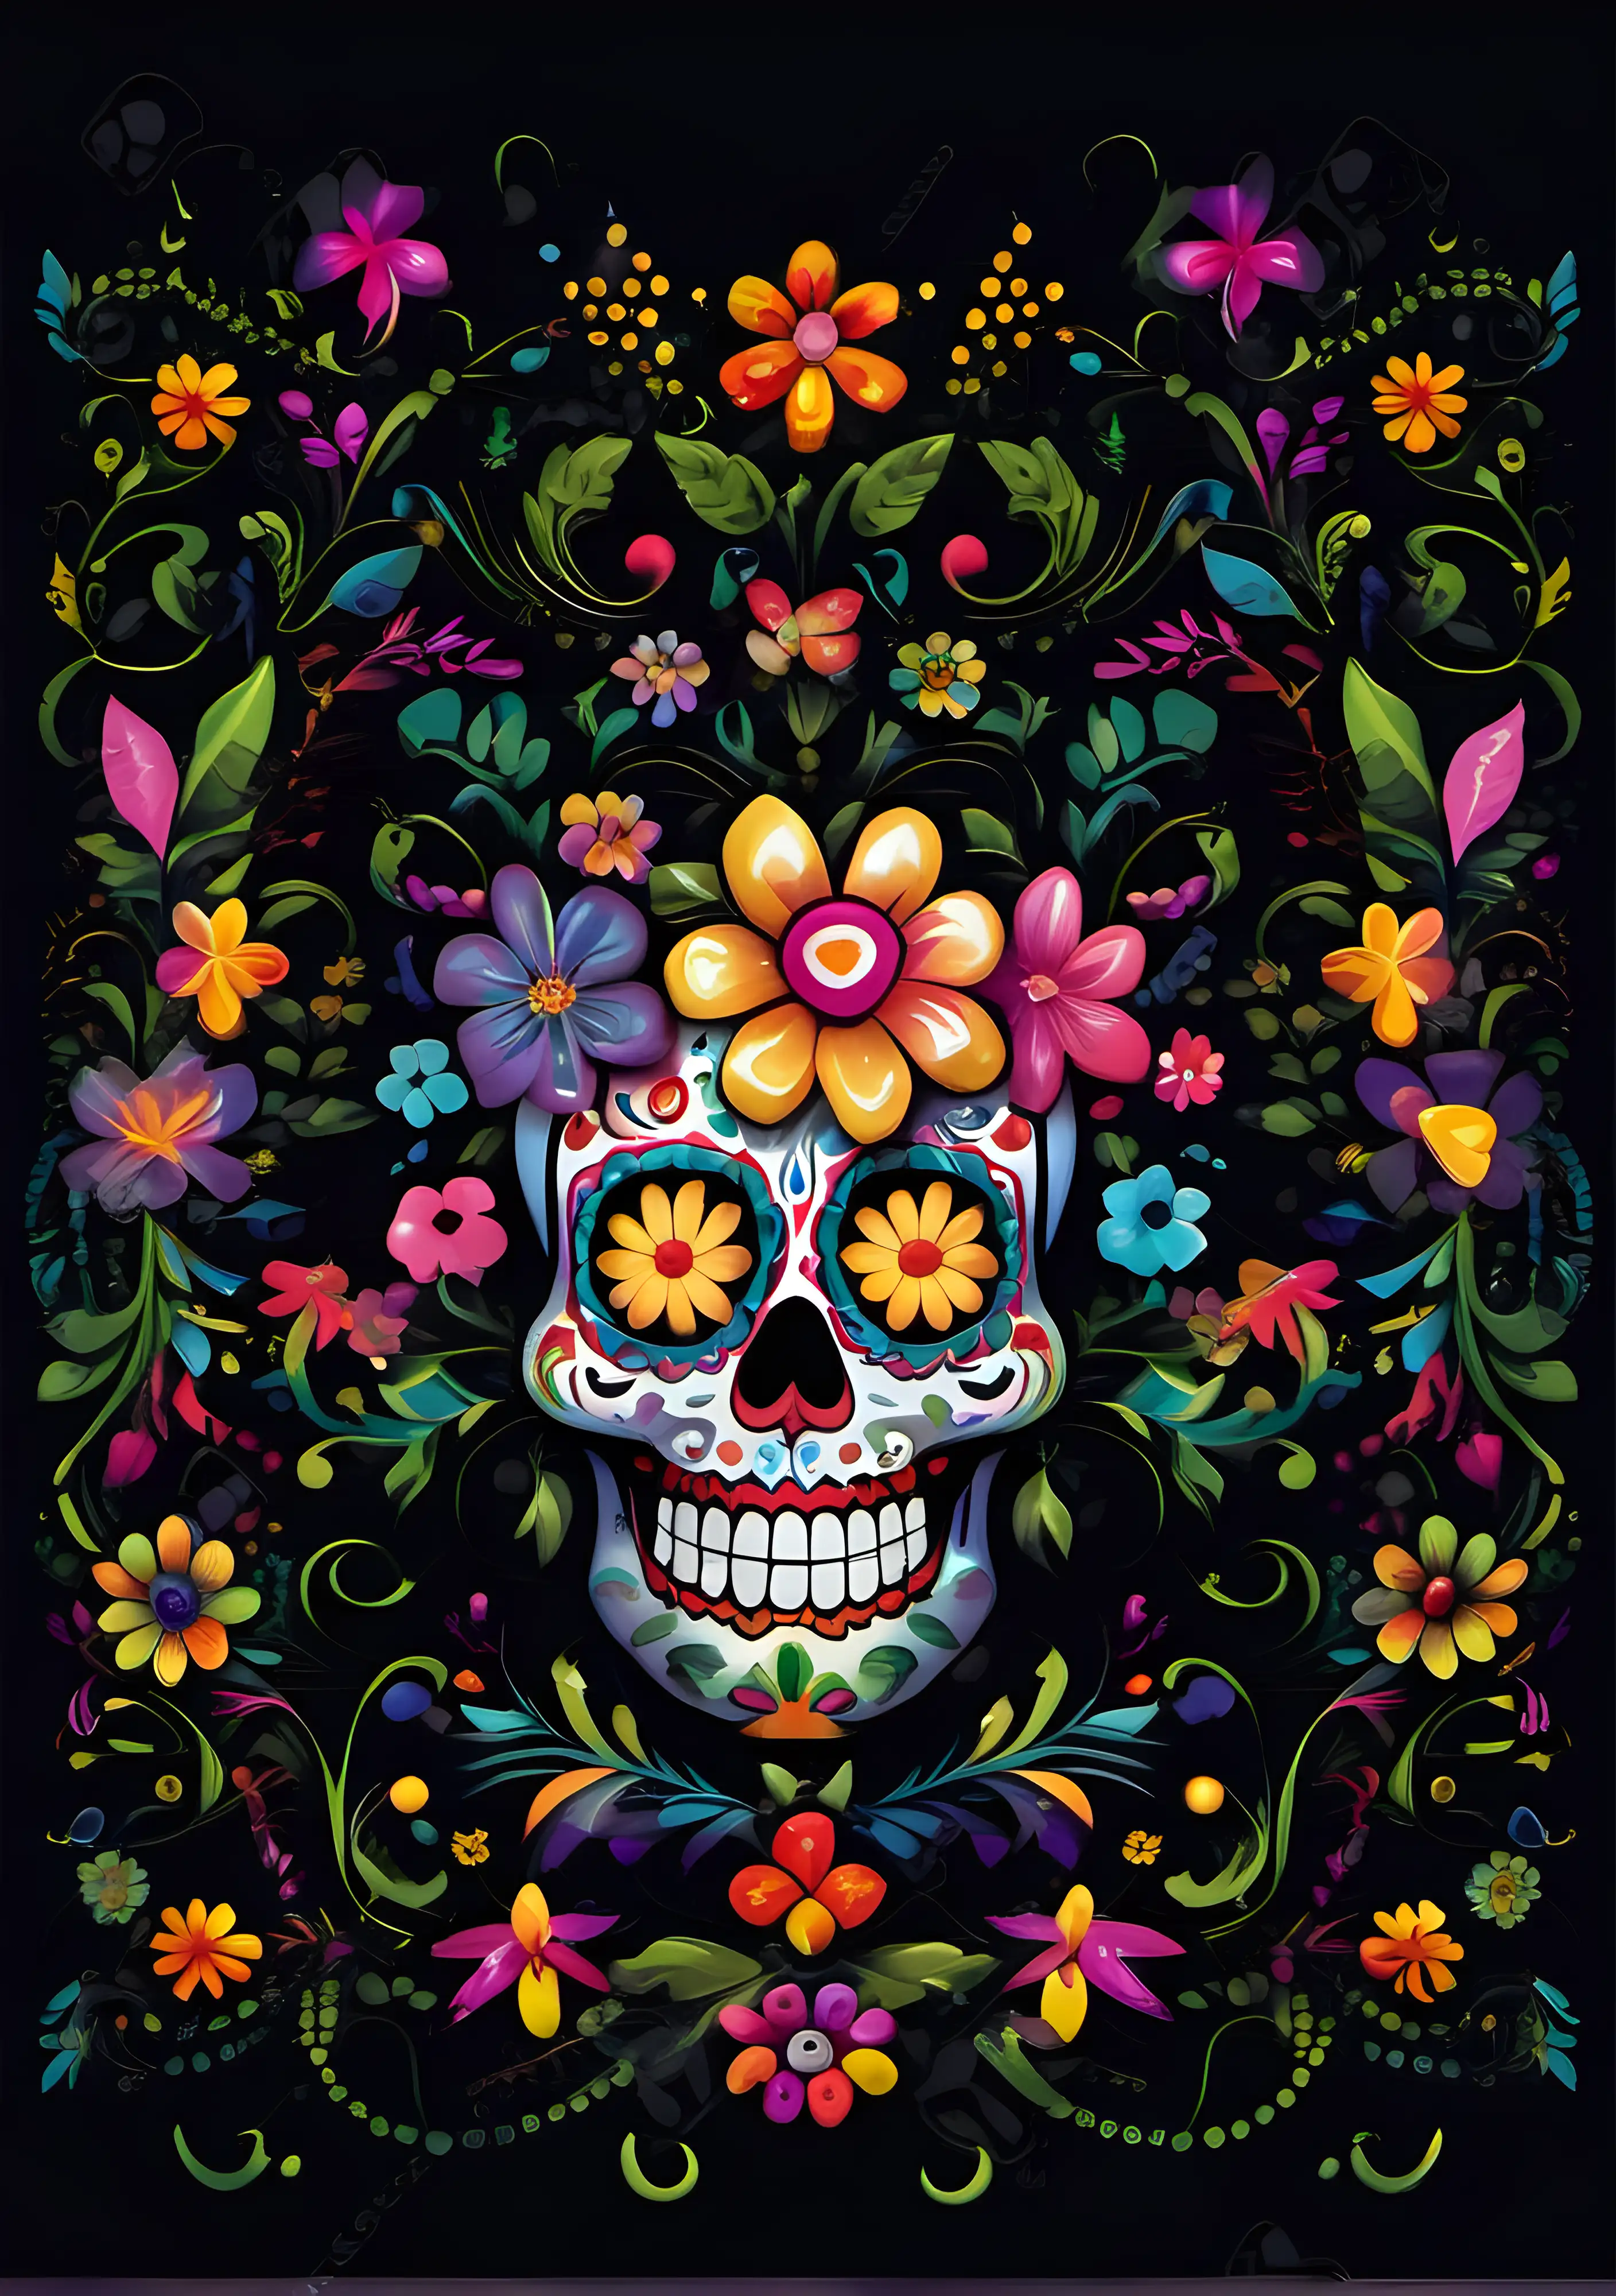 Very defined Colorful Happy Funny Sugar skull with flowers and flower border with no writing